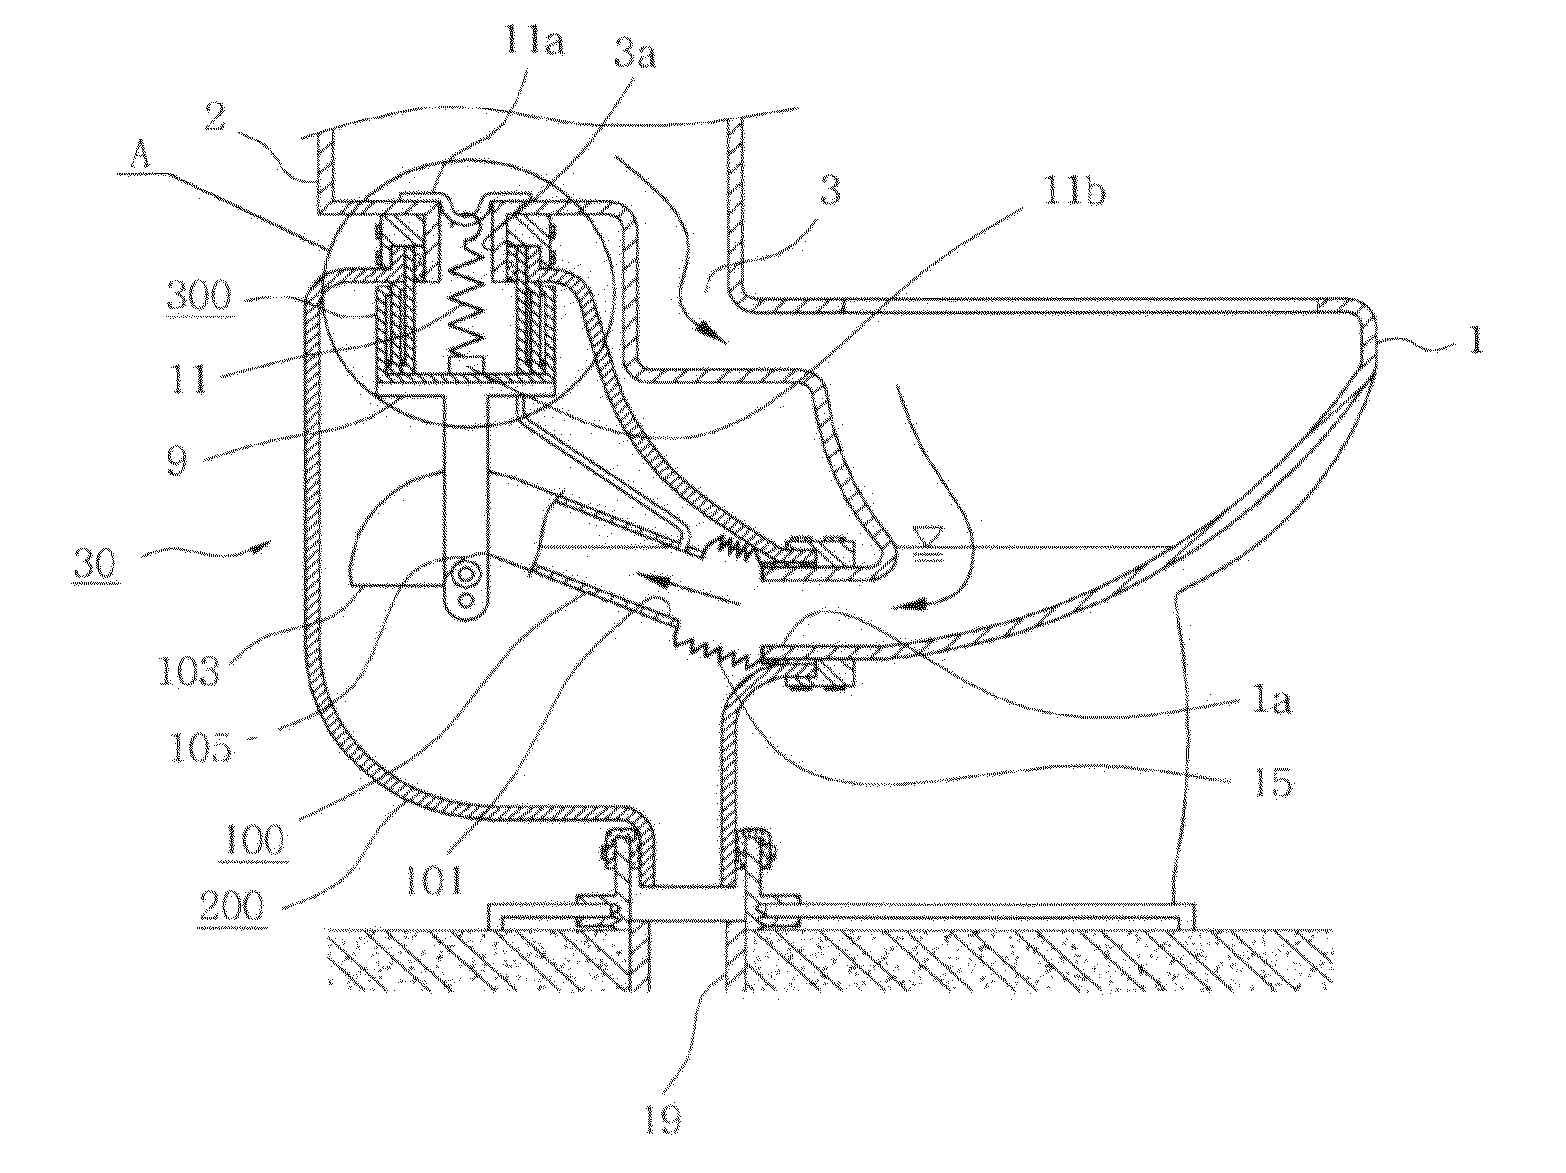 Water Closet Comprising Variable Soil Exhaust System